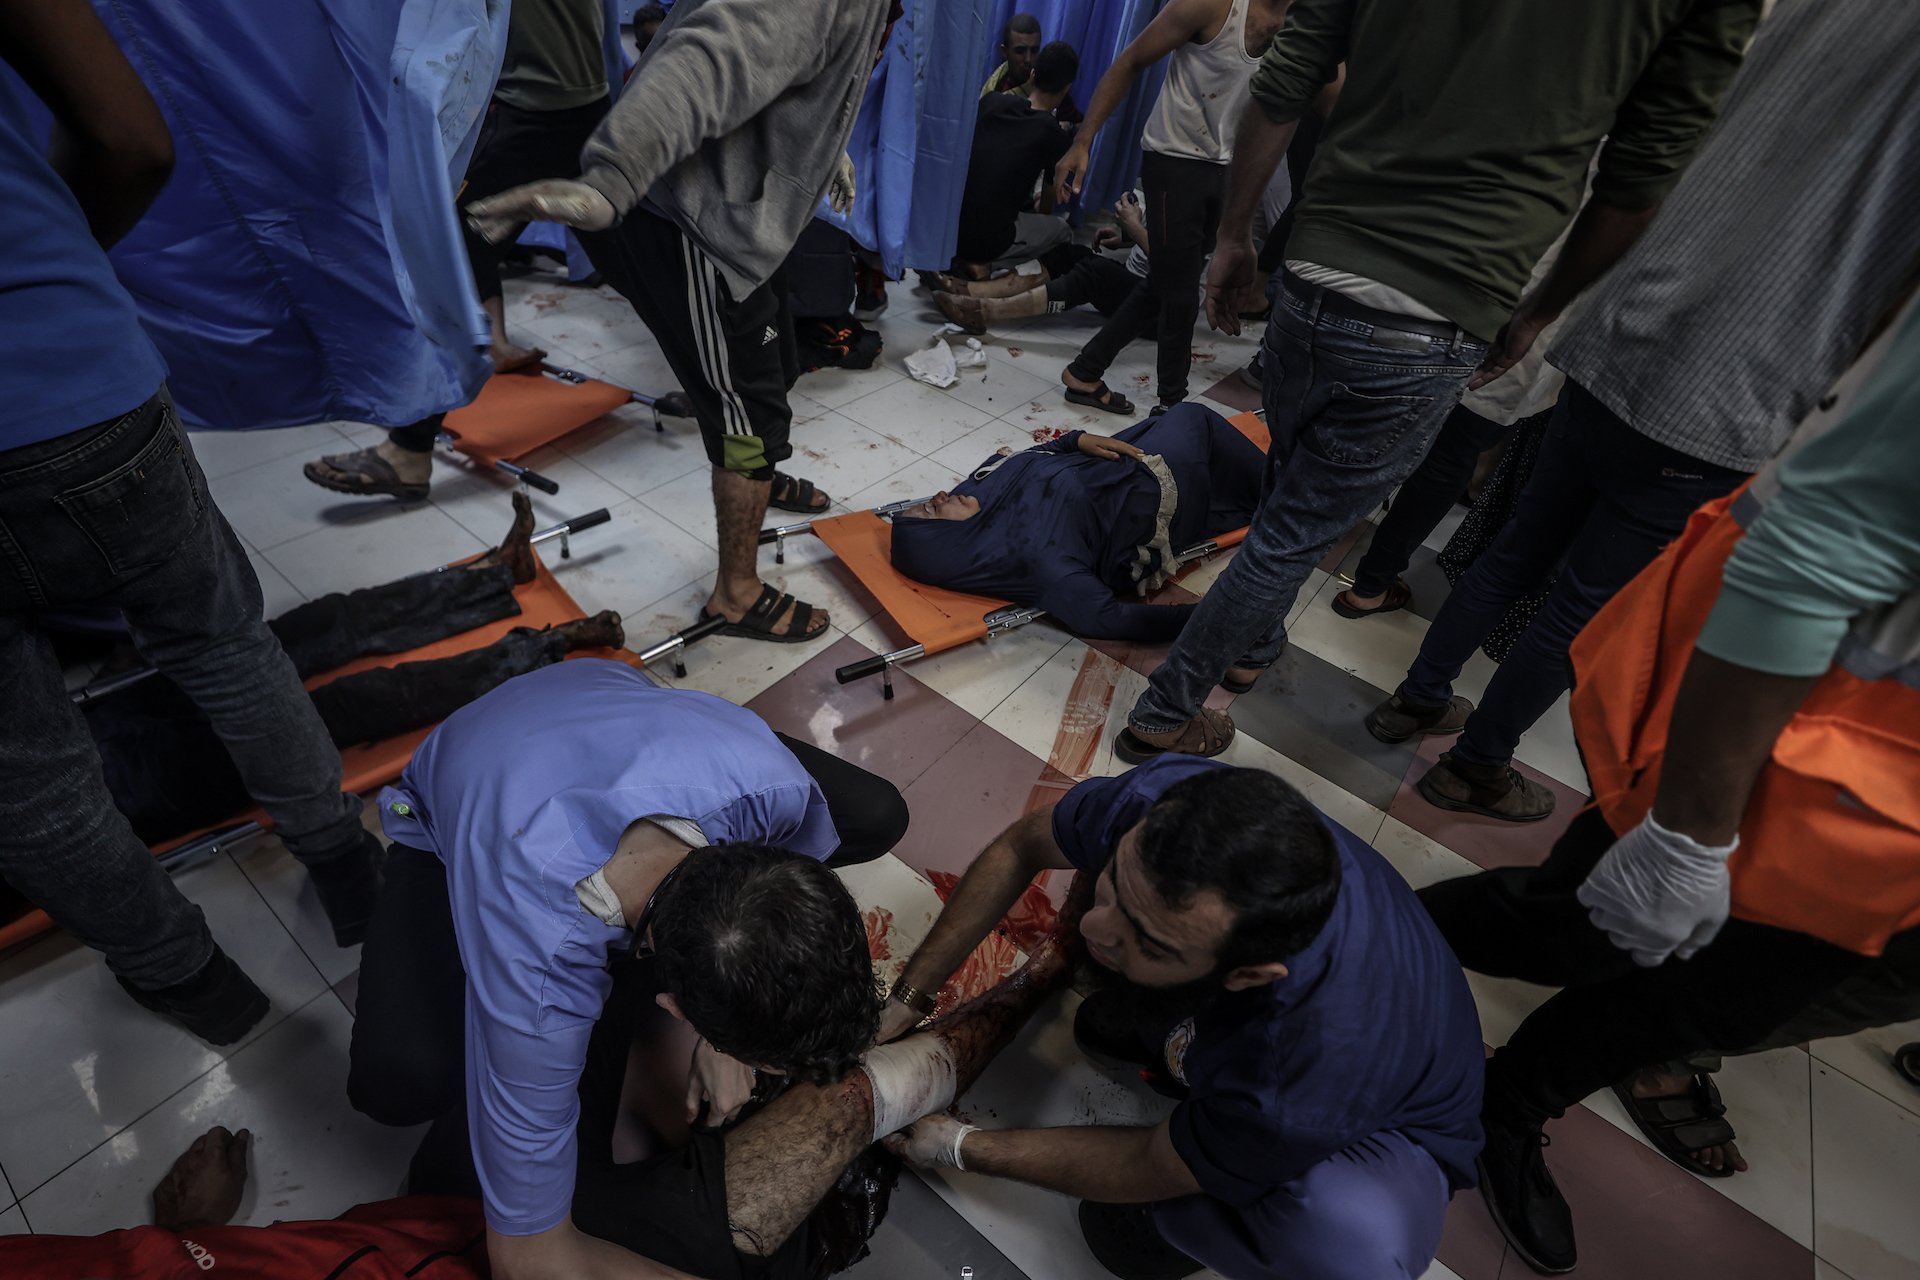 Wounded people lie on the floor while others care for them to the best of their ability without essential medical supplies or infrastructure.